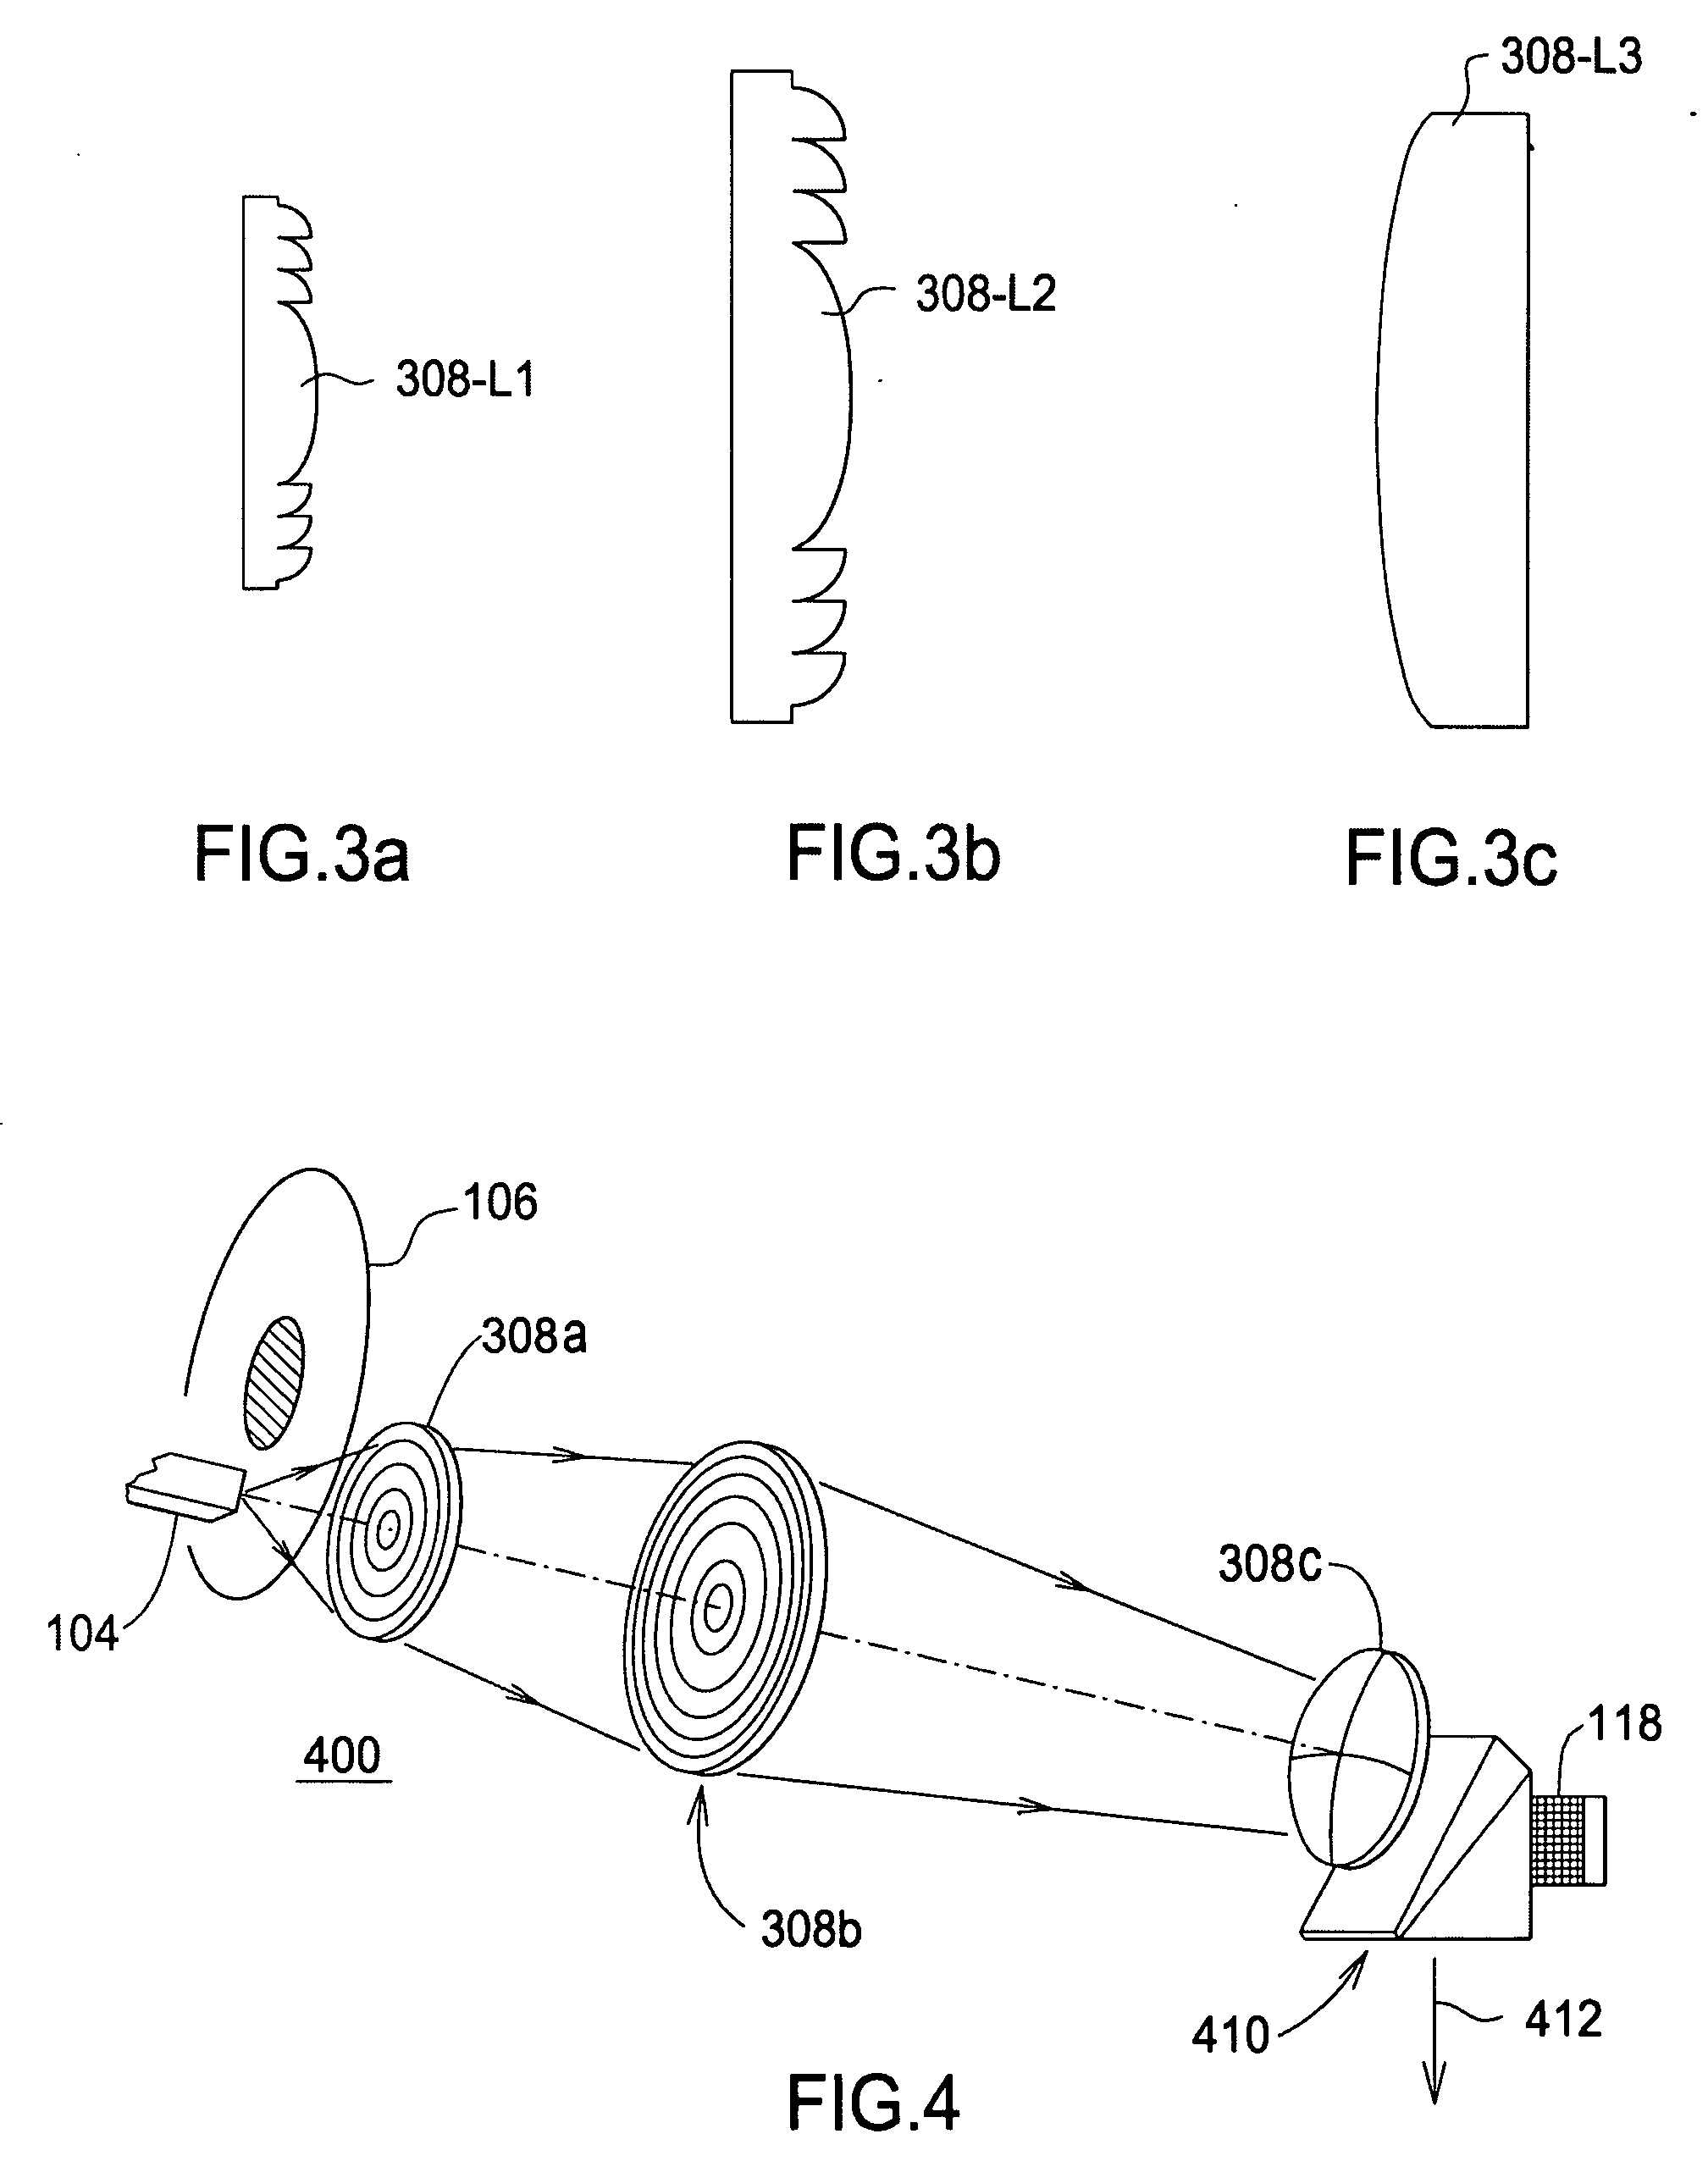 Projection illumination systems lenses with diffractive optical elements